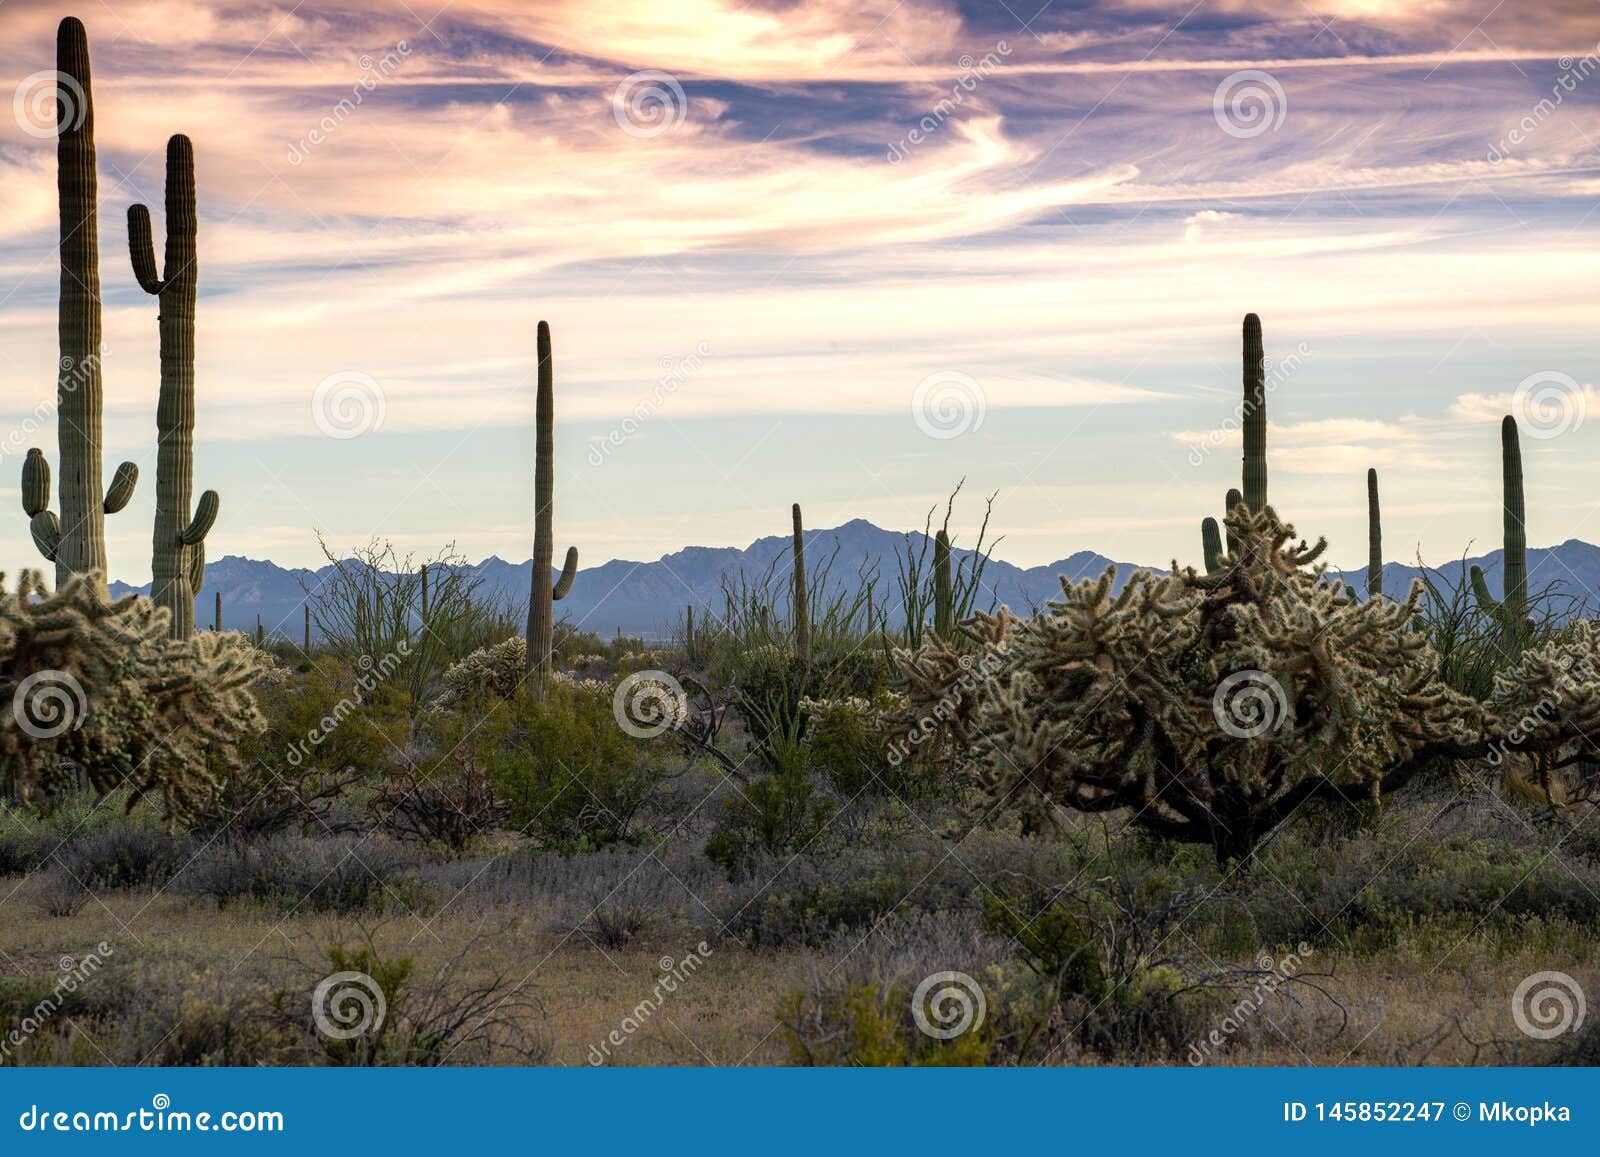 organ pipe cactus national monument, with chainfruit cholla and saguaros at sunset